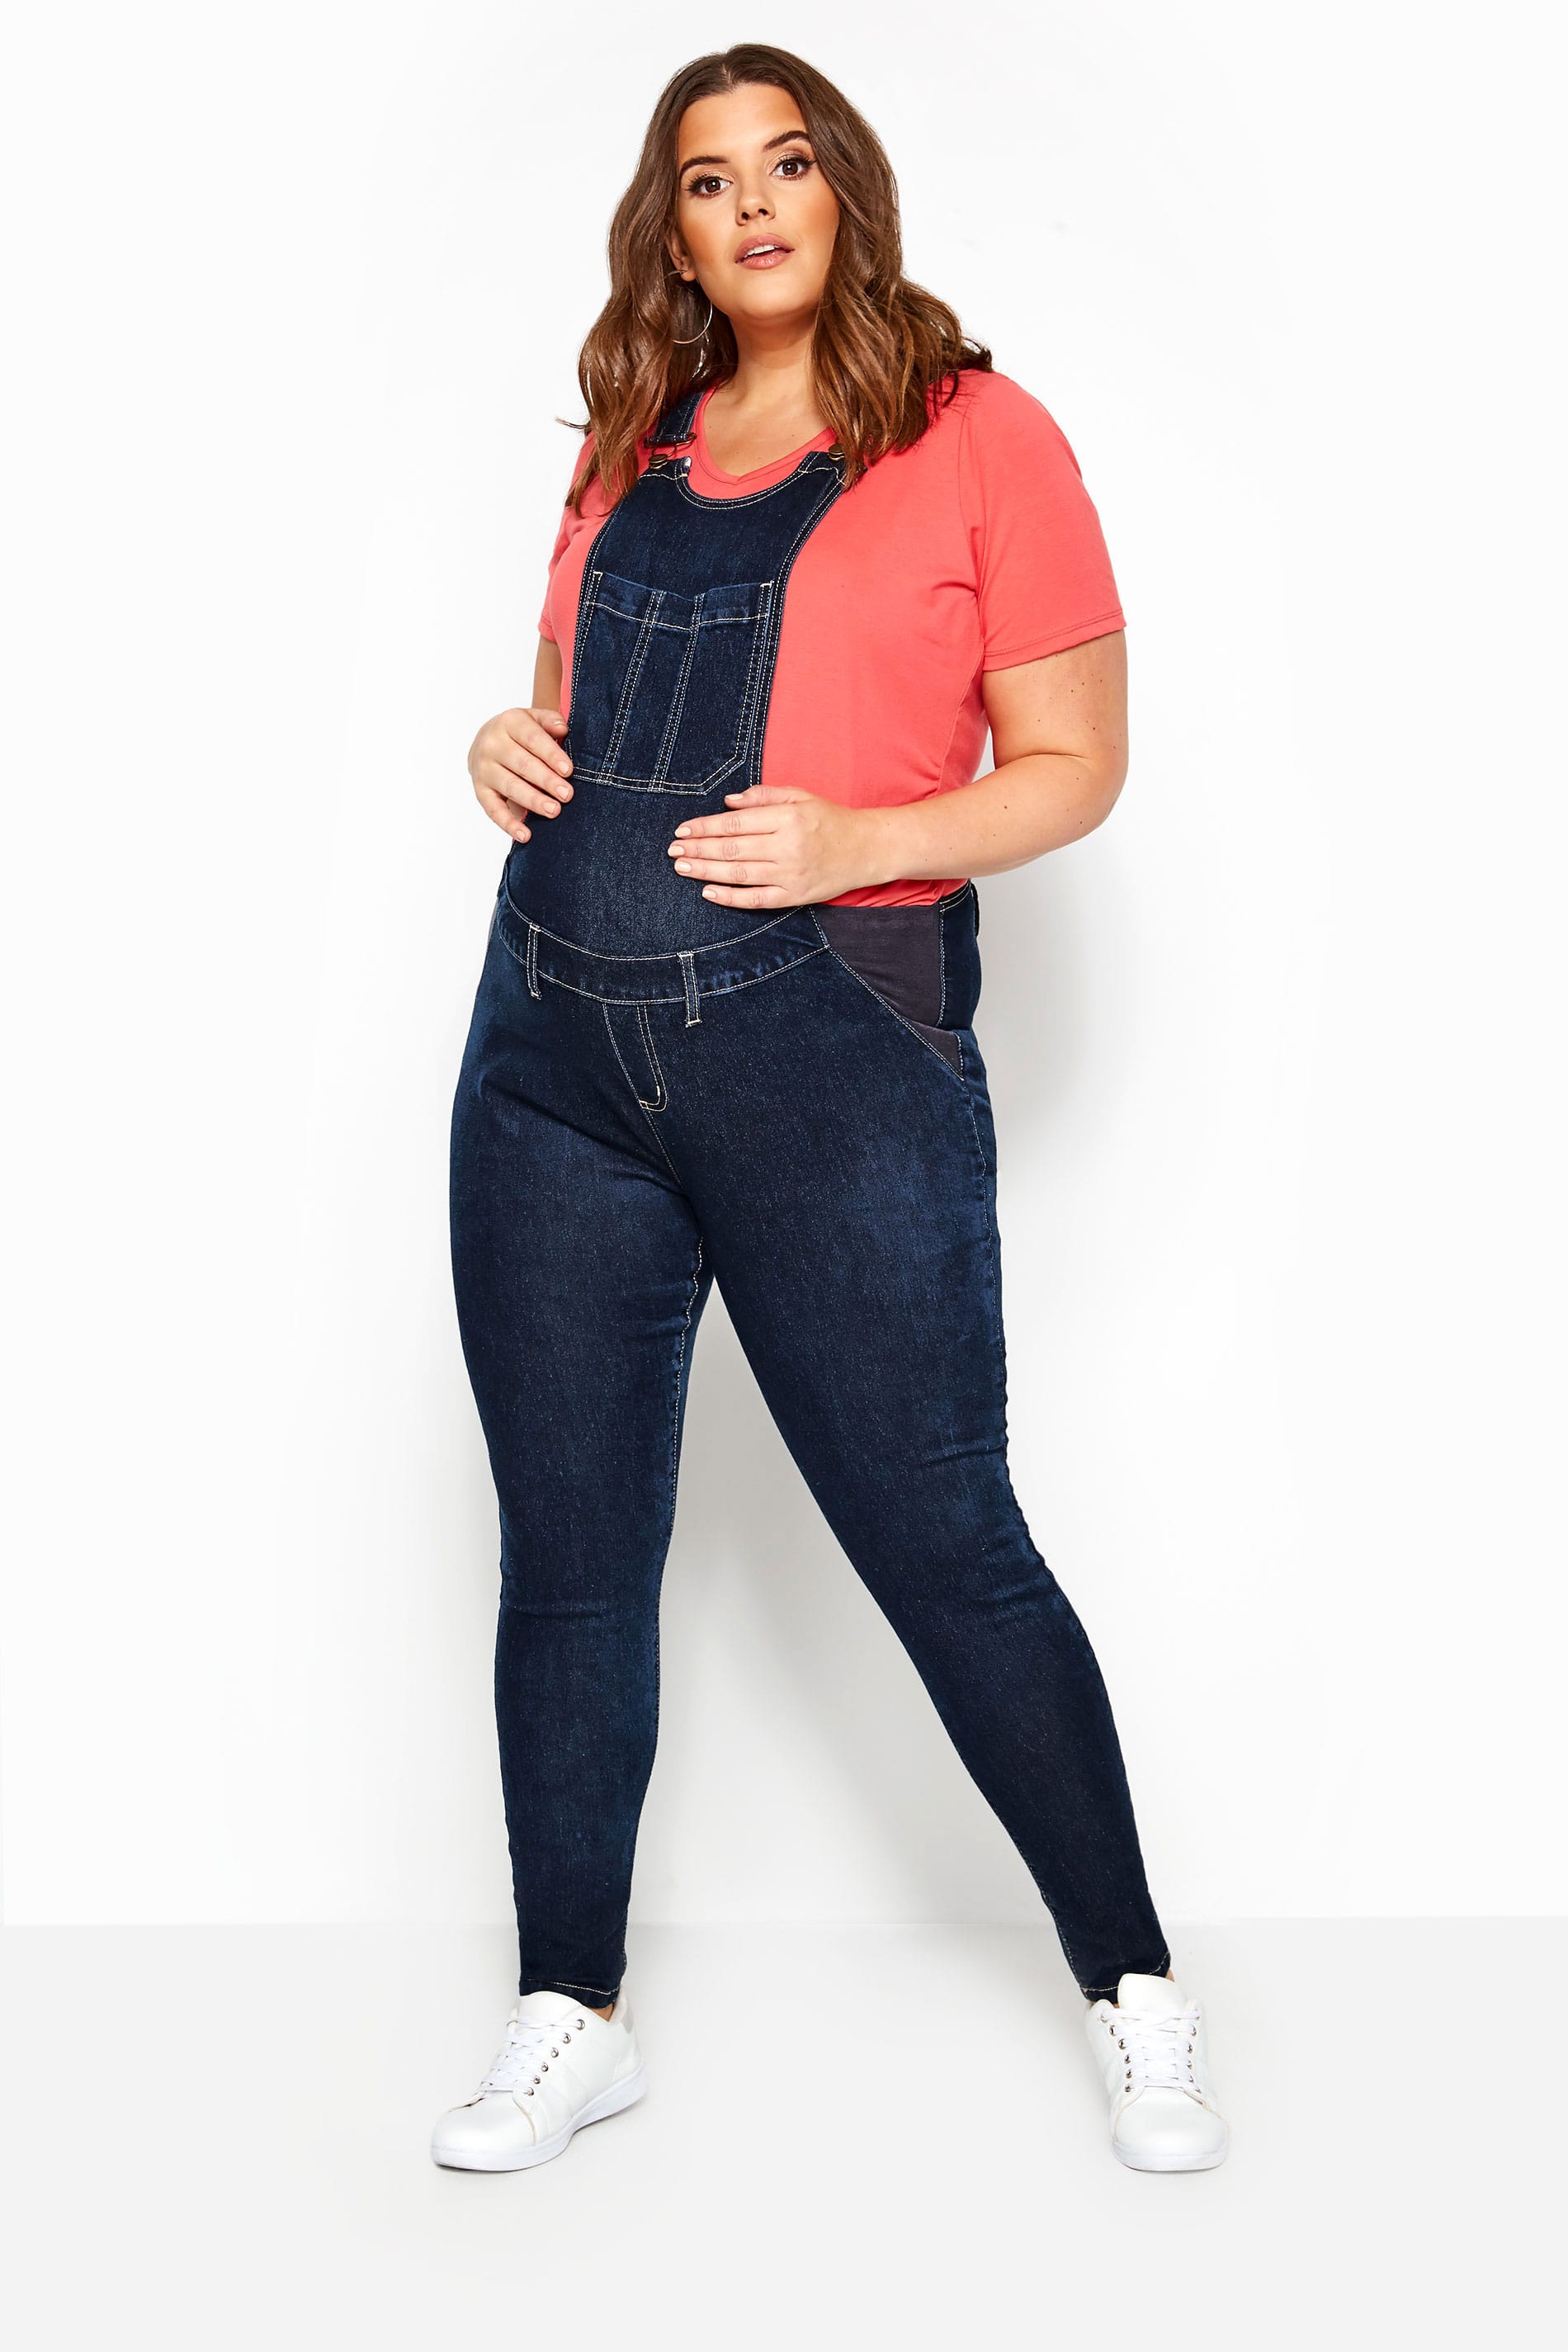 Yours Clothing Bump it up maternity blue denim dungarees